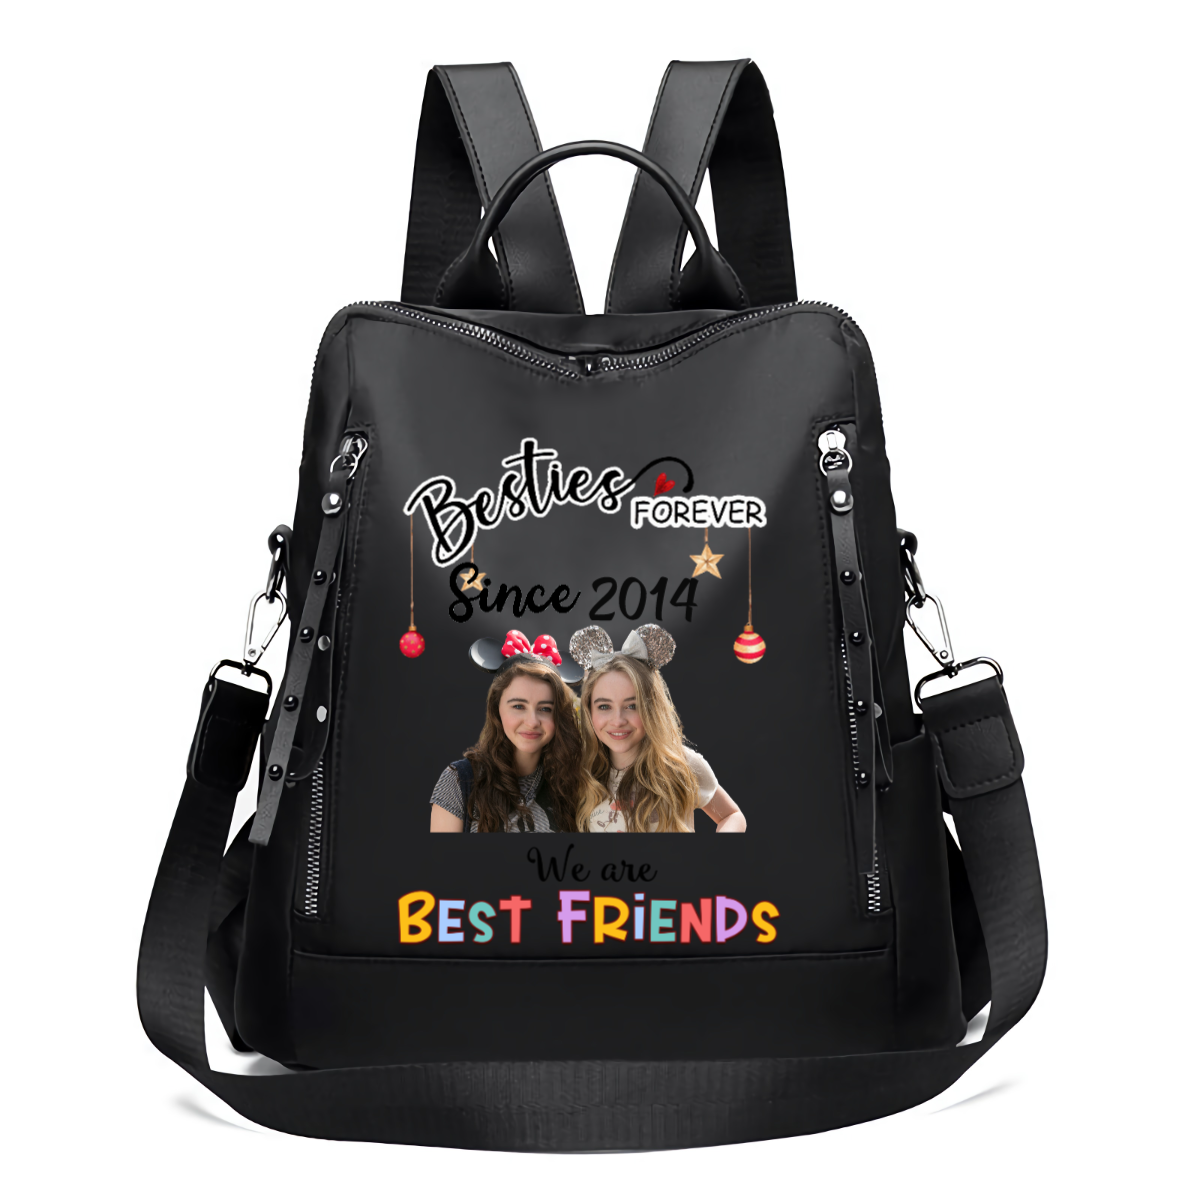 Besties Since Personalized Photo Backpacks